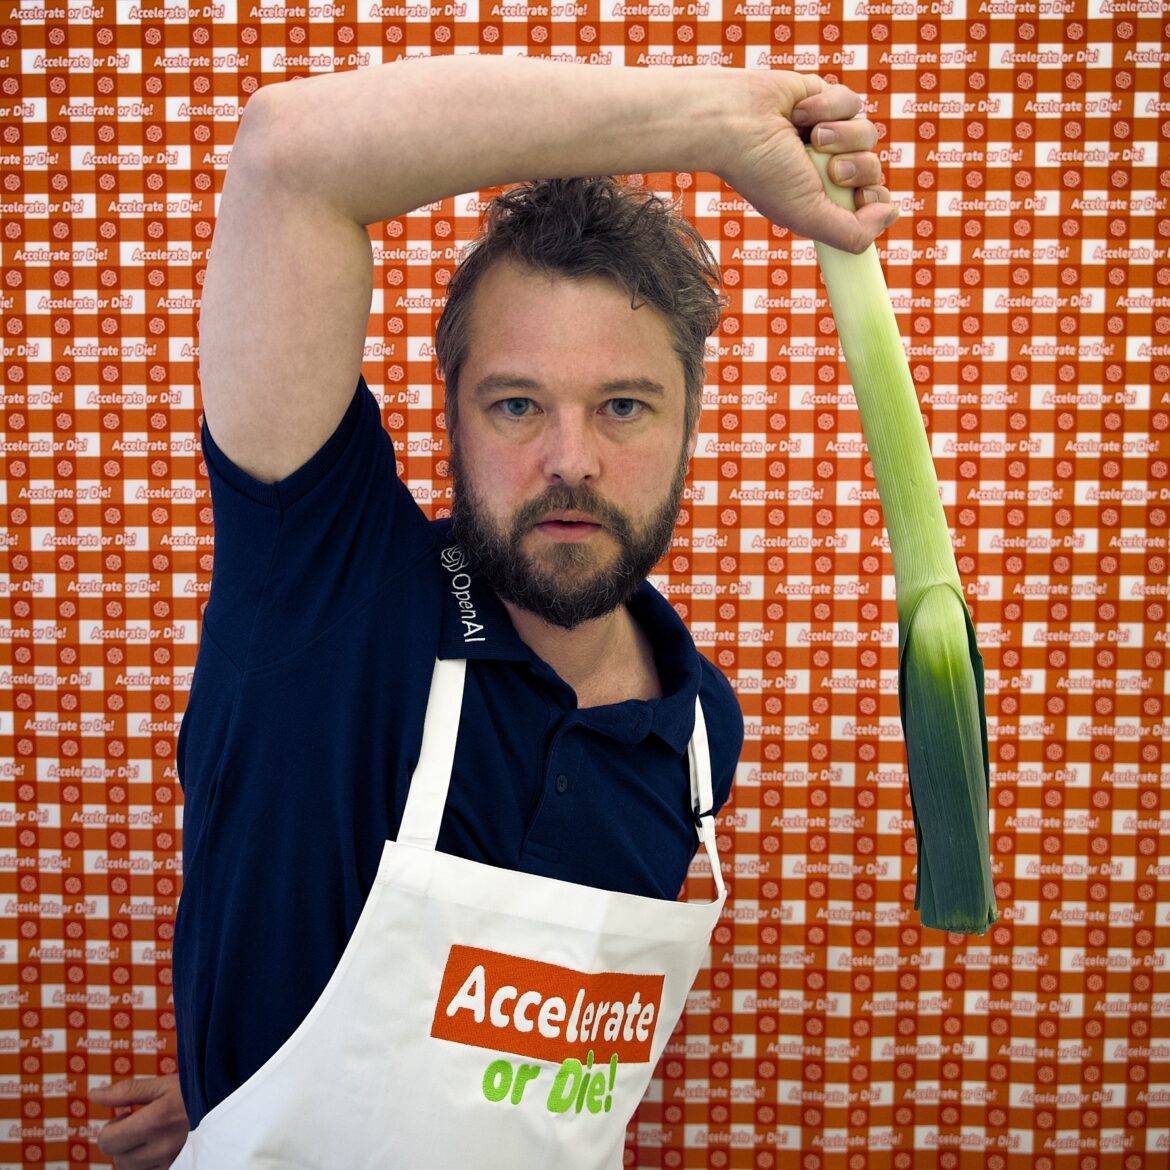 Florian Egermann wearing a dark blue shirt and a white apron with the text "Accelerate or Die" stands against a backdrop with repeated logos. He holds a leek over his head with his left hand, looking intently at the camera.